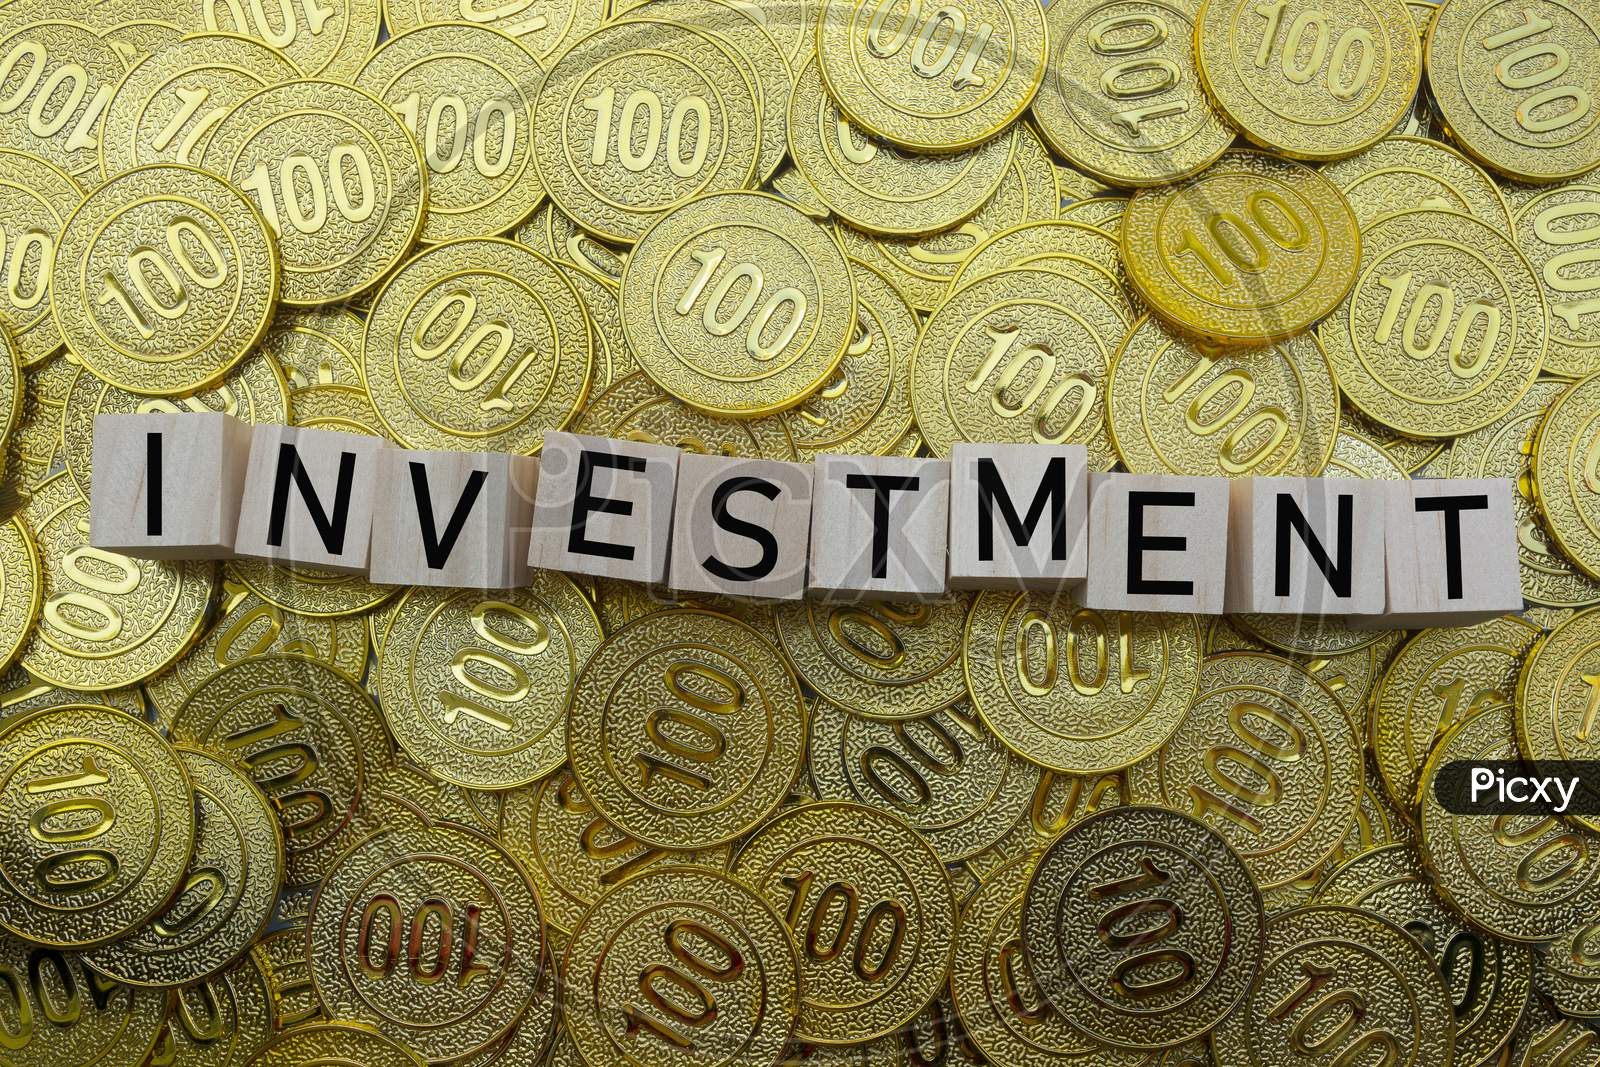 Investment Text On Wood Block With A Pile Of Coins